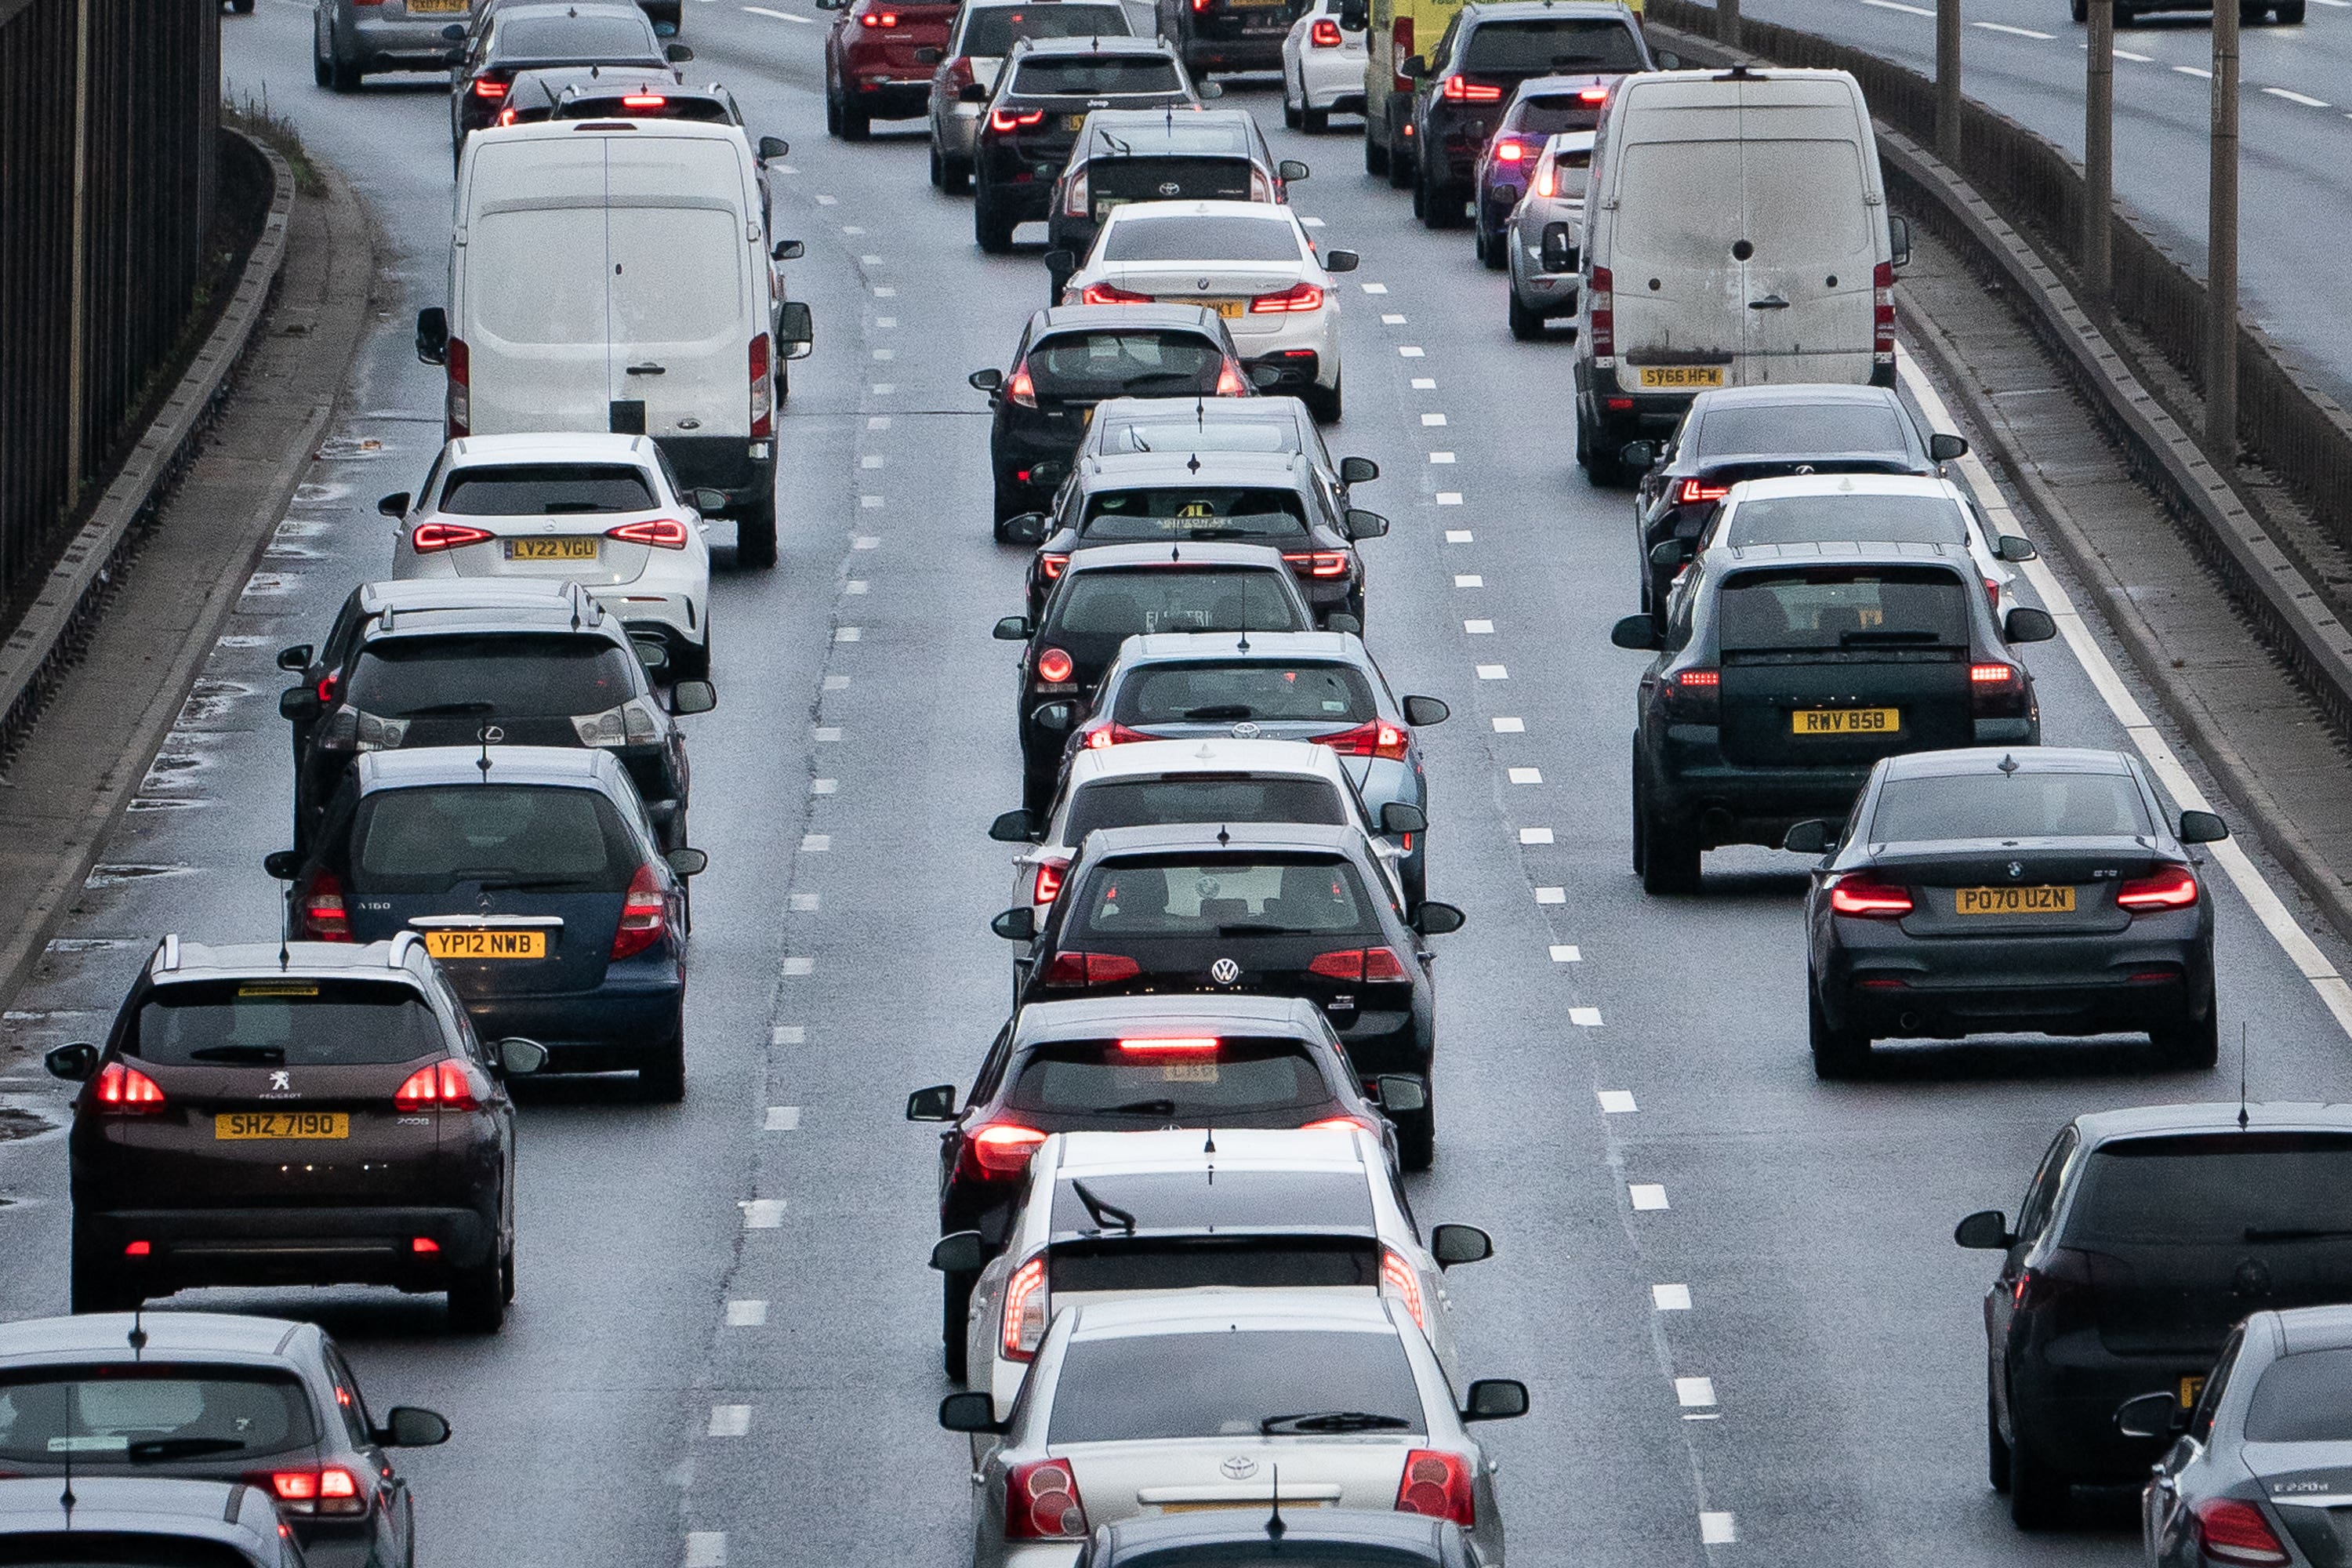 London is the world’s slowest and second most expensive city to drive in, according to new research (Aaron Chown/PA)